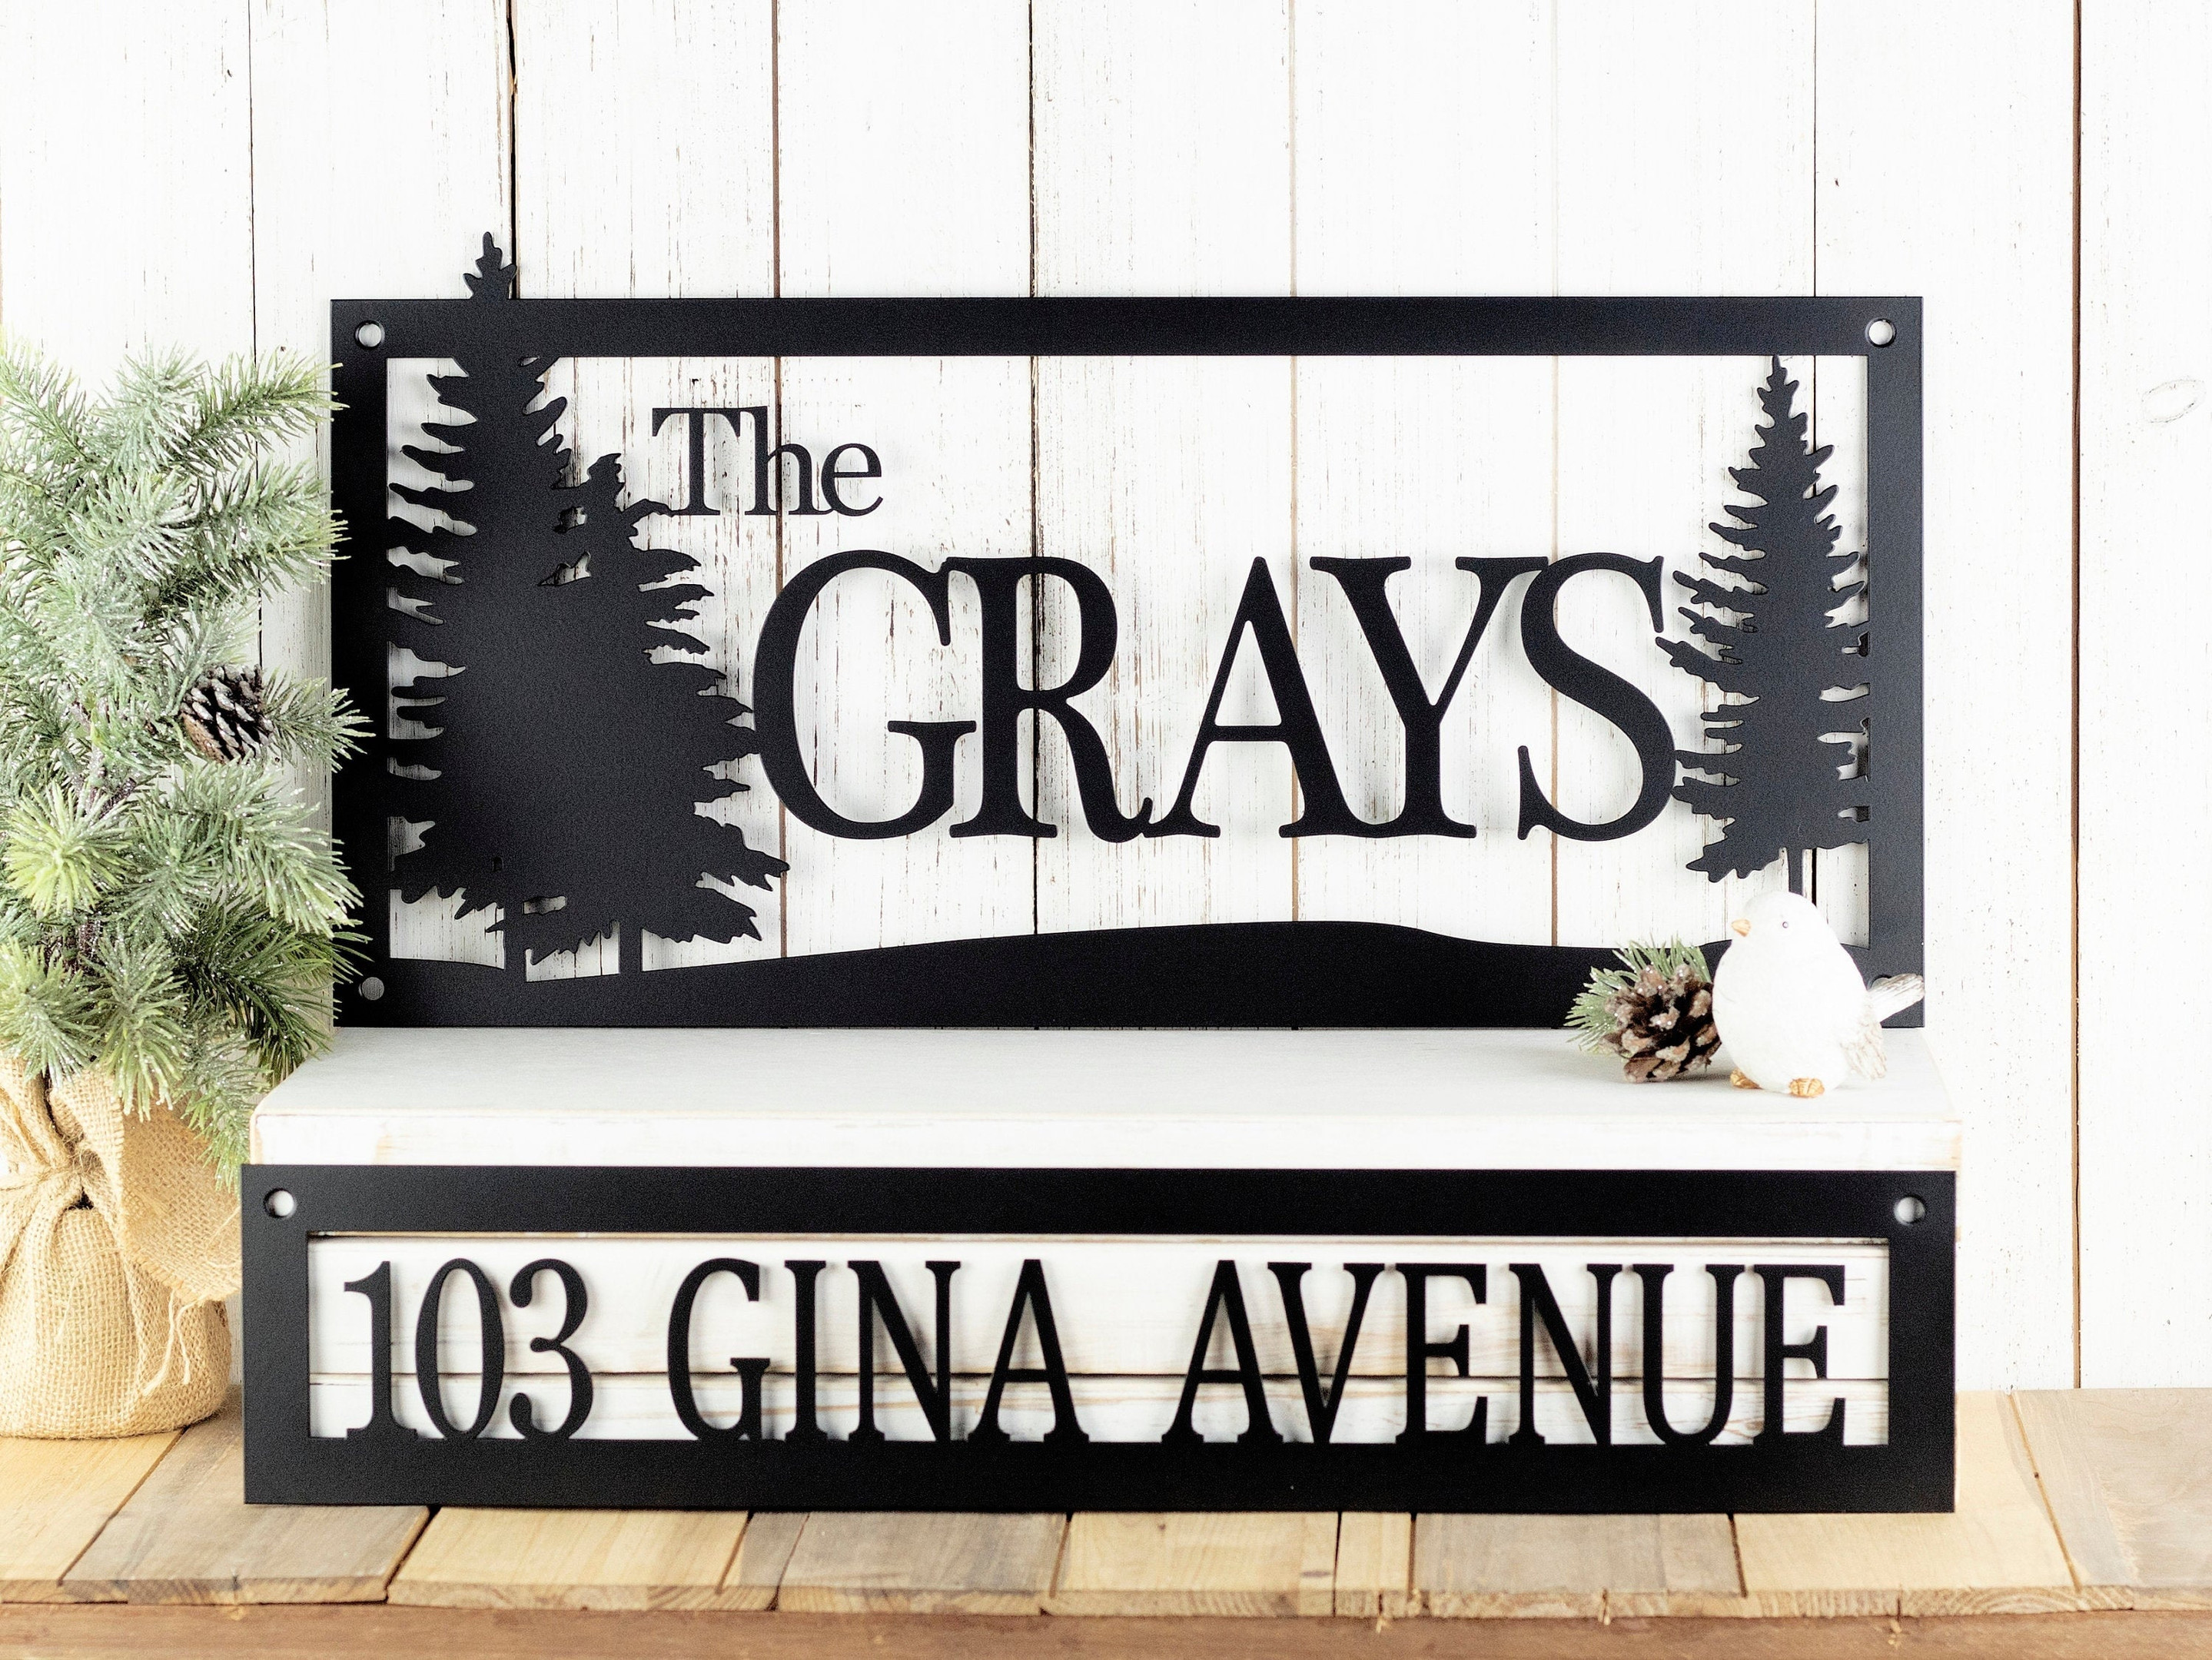 Custom Name And Address Metal Sign, Pine Trees, Outdoor Sign, Metal Wall Art, House Number, Address Plaque, Family Name, Laser Cut Metal Signs Custom Gift Ideas 12x12IN